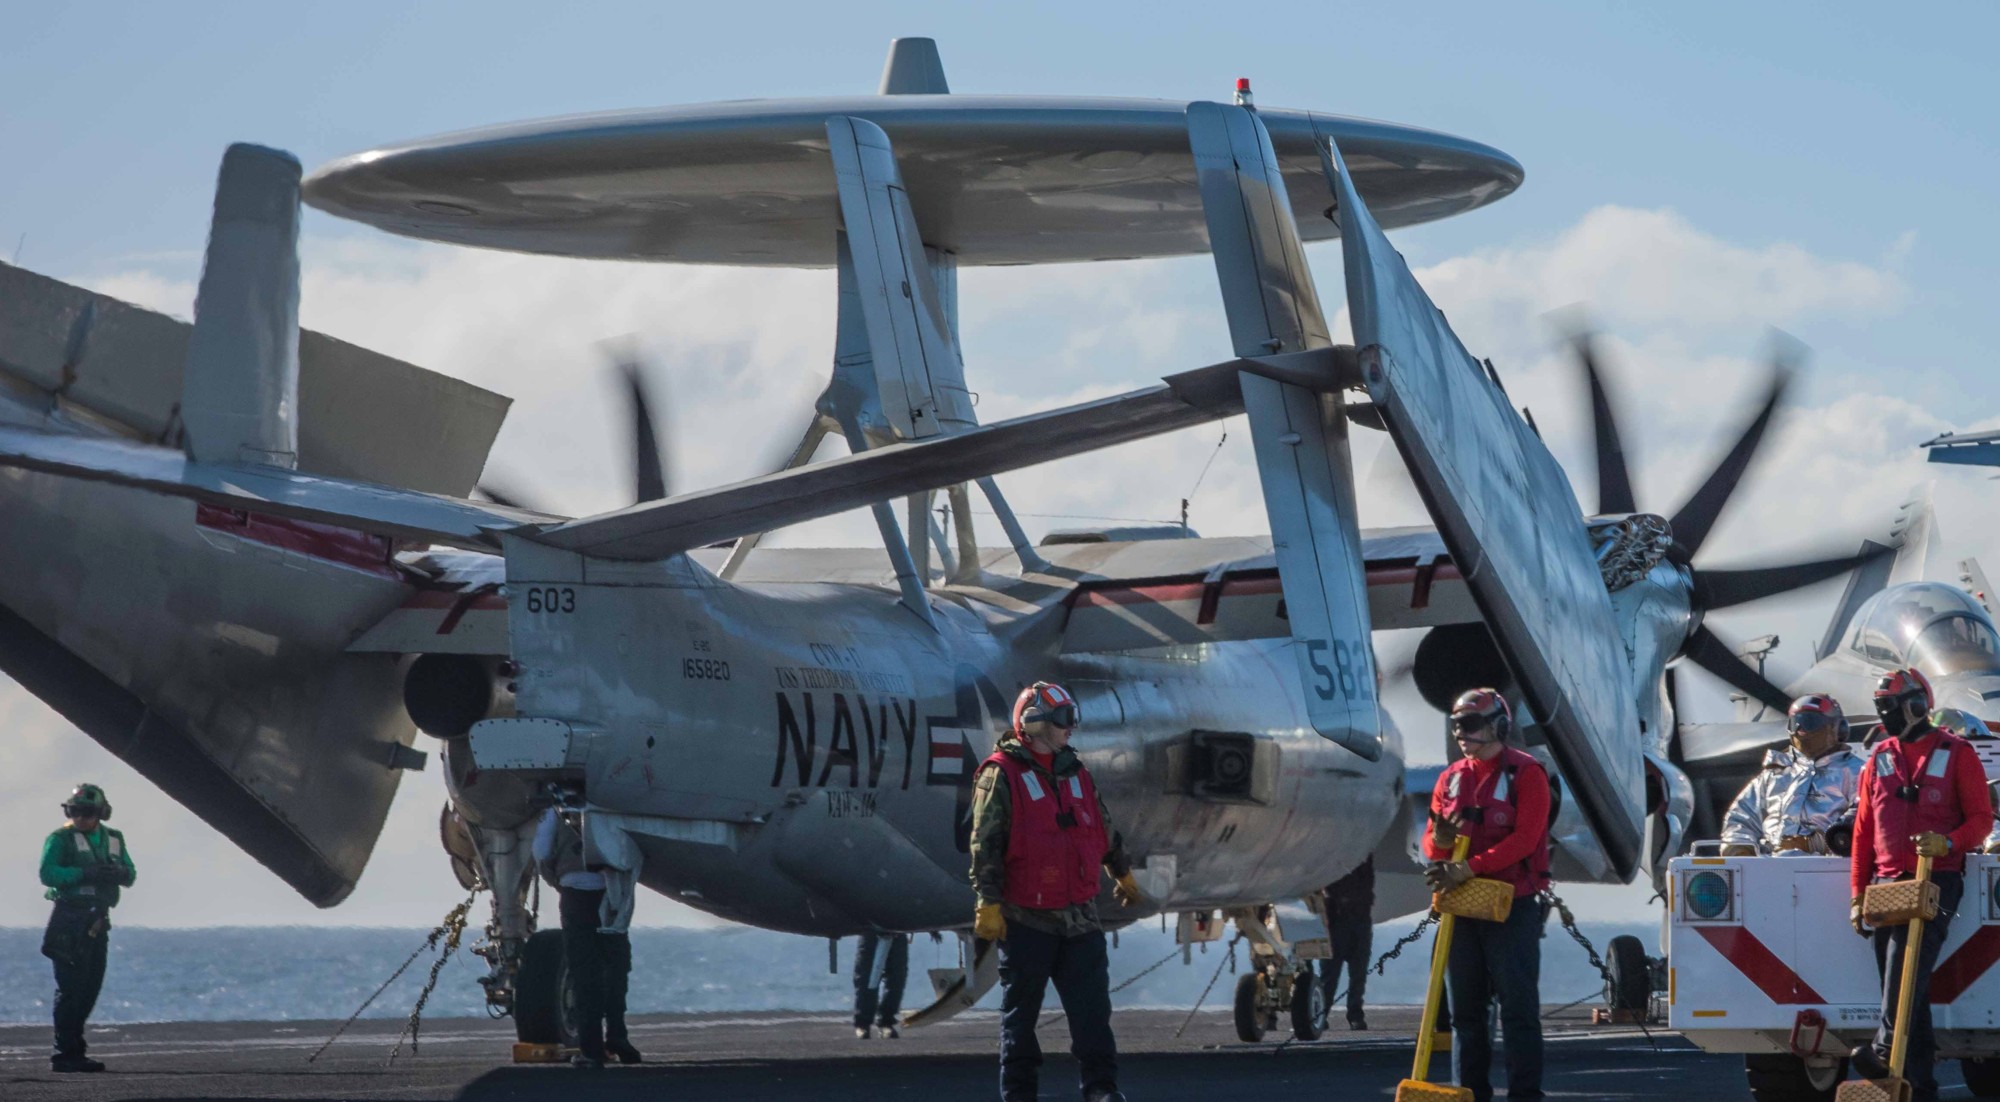 vaw-116 sun kings airborne command control squadron carrier early warning cvw-17 uss theodore roosevelt cvn-71 59